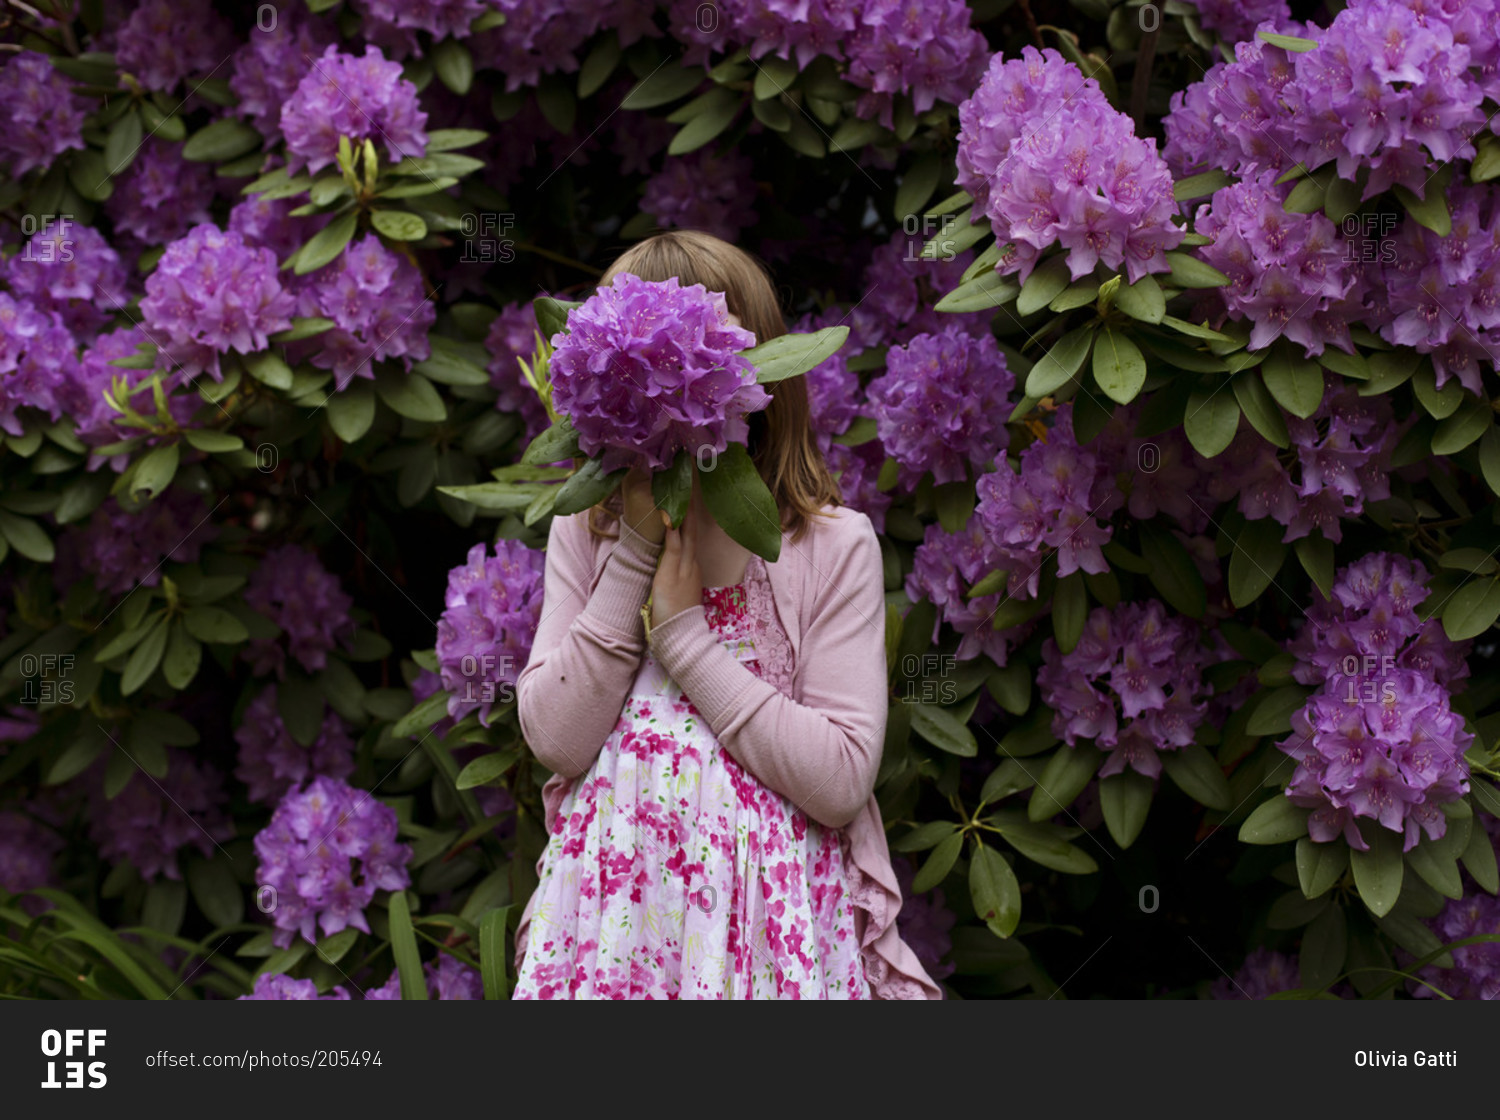 Girl standing in front of rhododendron bush with flower covering her face